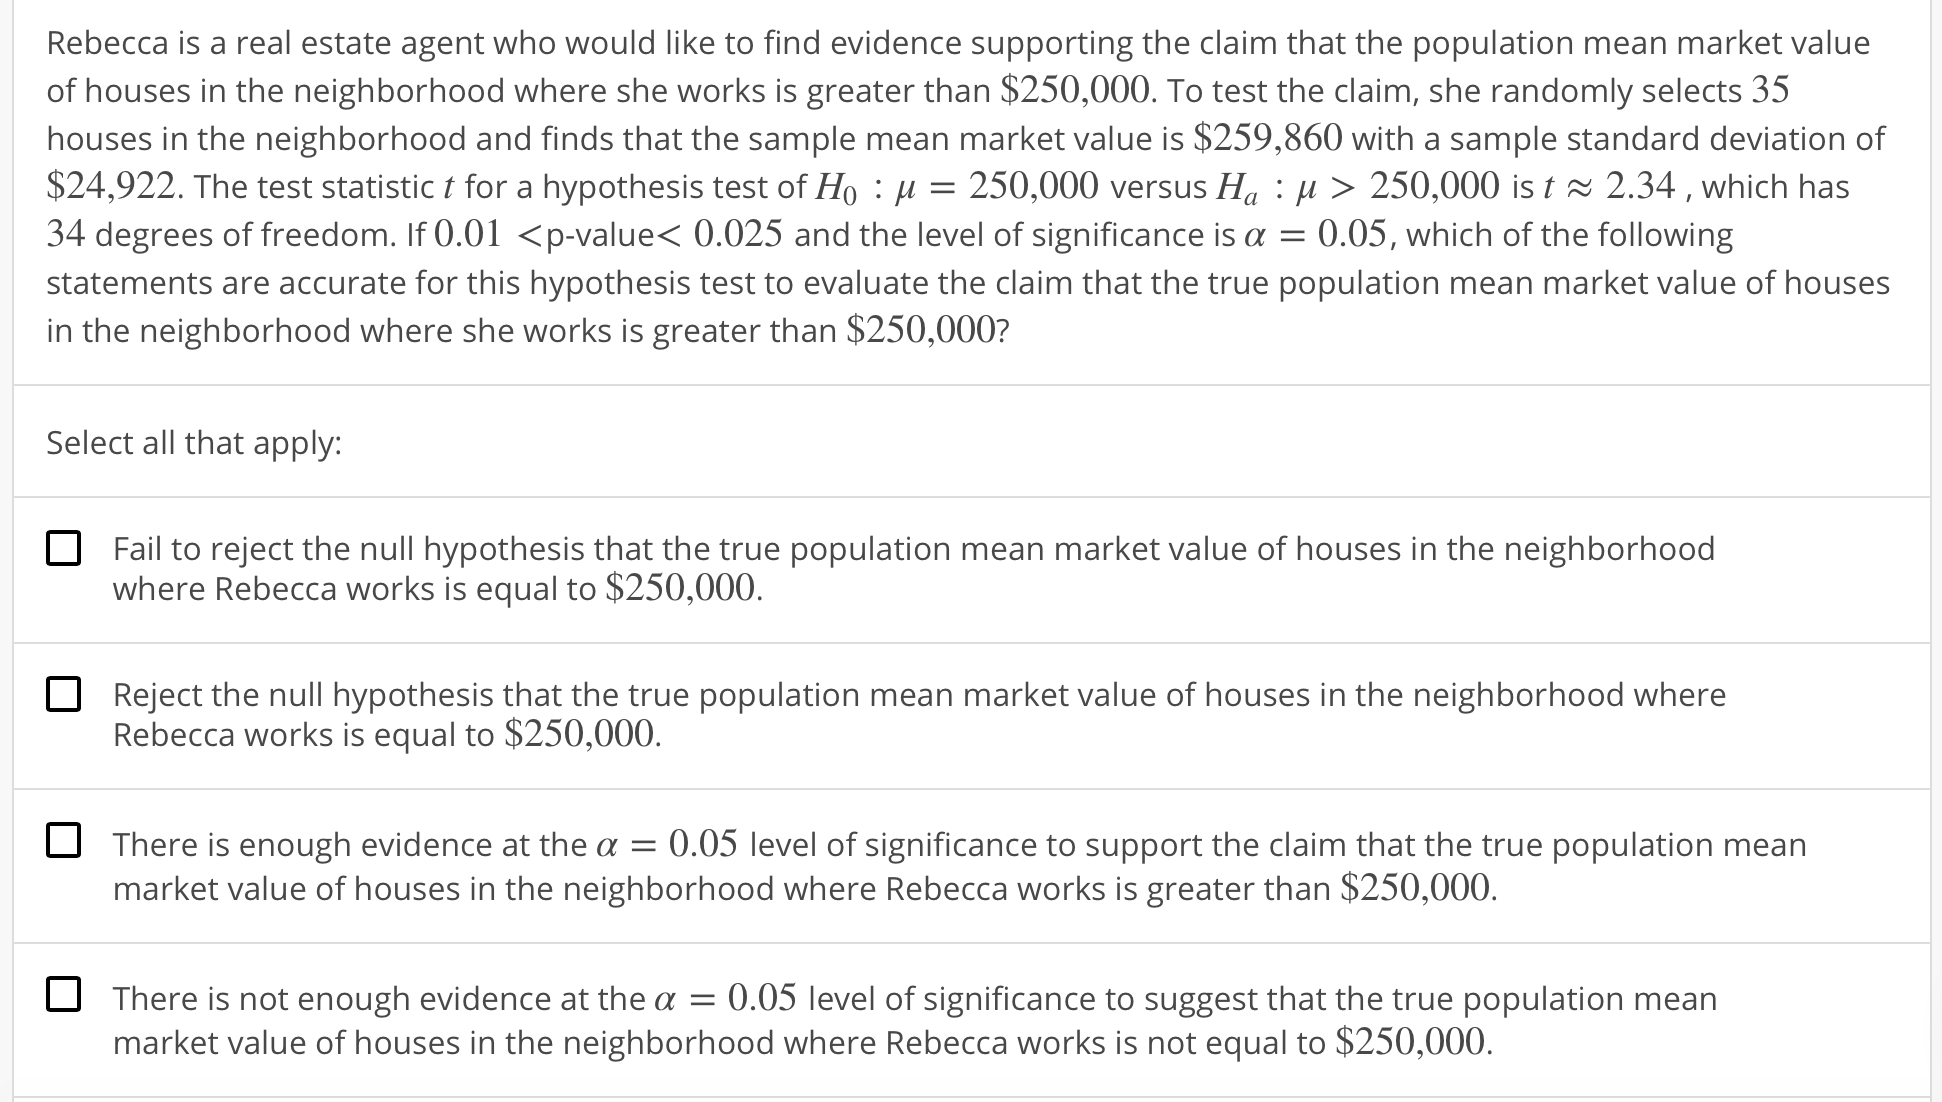 Rebecca is a real estate agent who would like to find evidence supporting the claim that the population mean market value
of houses in the neighborhood where she works is greater than $250,000. To test the claim, she randomly selects 35
houses in the neighborhood and finds that the sample mean market value is $259,860 with a sample standard deviation of
$24,922. The test statistic t for a hypothesis test of Ho : μ = 250,000 versus Ha : μ 〉 250,000 is t 2.34 , which has
34 degrees of freedom. If 0.01 <p-value< 0.025 and the level of significance is α-0.05, which of the following
statements are accurate for this hypothesis test to evaluate the claim that the true population mean market value of houses
in the neighborhood where she works is greater than $250,000?
Select all that apply:
O
Fail to reject the null hypothesis that the true population mean market value of houses in the neighborhood
where Rebecca works is equal to $250,000
Reject the null hypothesis that the true population mean market value of houses in the neighborhood where
Rebecca works is equal to $250,000
There is enough evidence at the a
0.05 level of significance to support the claim that the true population mean
market value of houses in the neighborhood where Rebecca works is greater than $250,000.
There is not enough evidence at the α-0.05 level of significance to suggest that the true population mean
market value of houses in the neighborhood where Rebecca works is not equal to $250,000.
